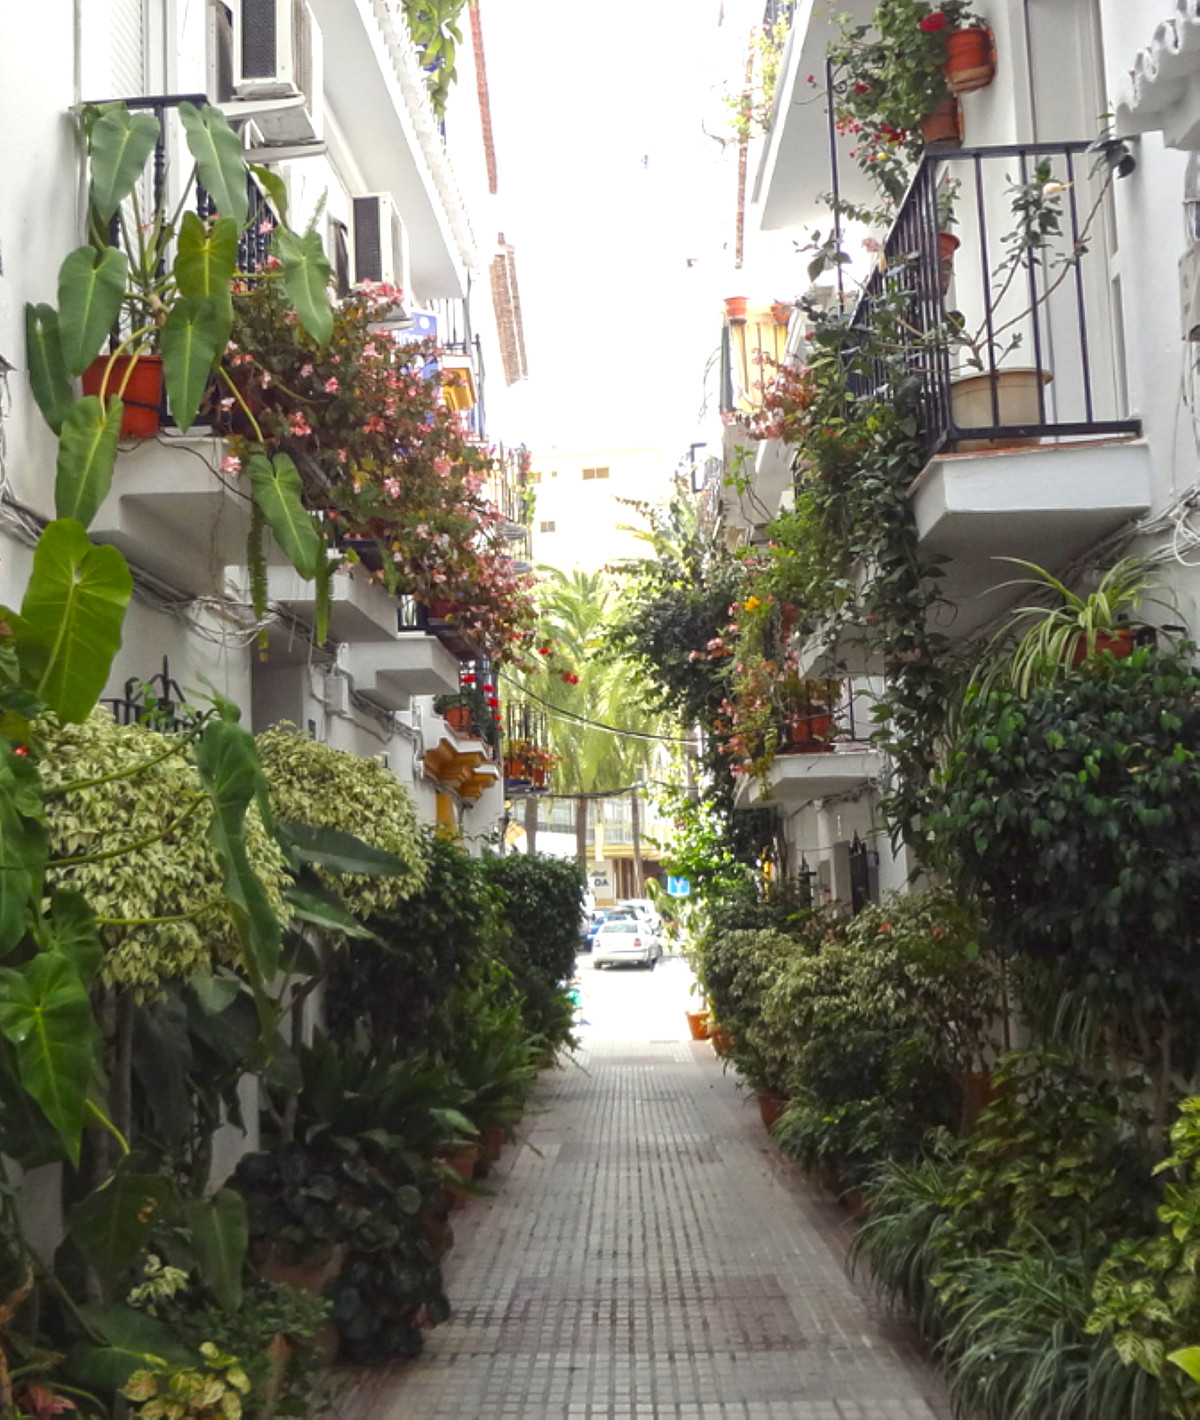 OFF MARKET UNTIL JANUARY 2022
A nice Guesthouse in the old town of Marbella only 3 minutes walking t, Spain